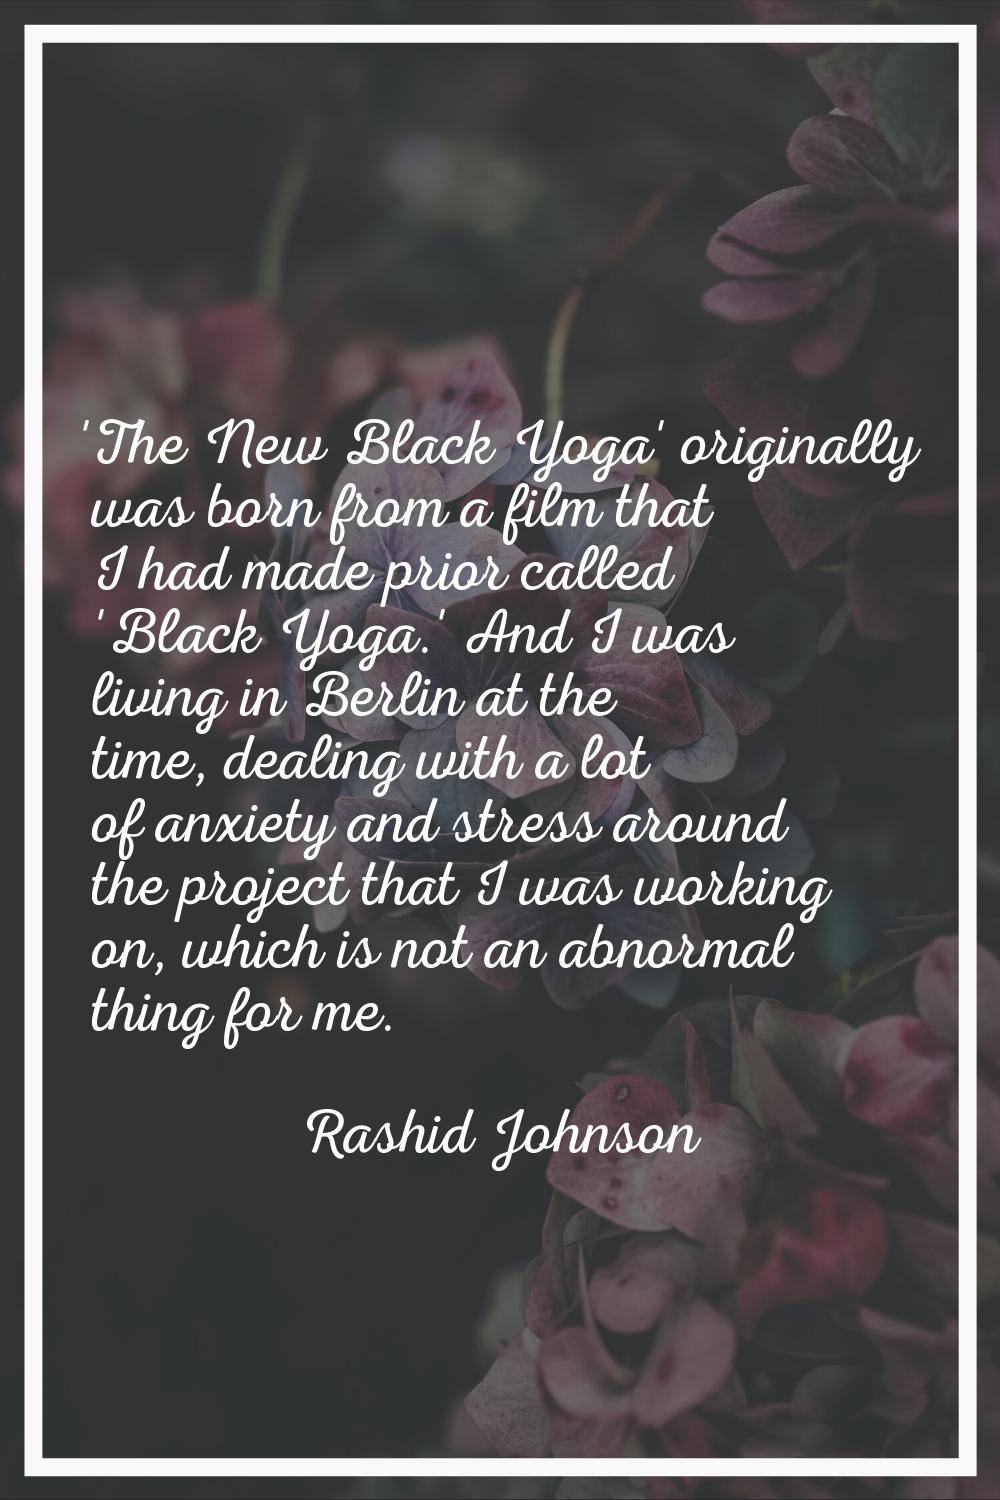 'The New Black Yoga' originally was born from a film that I had made prior called 'Black Yoga.' And